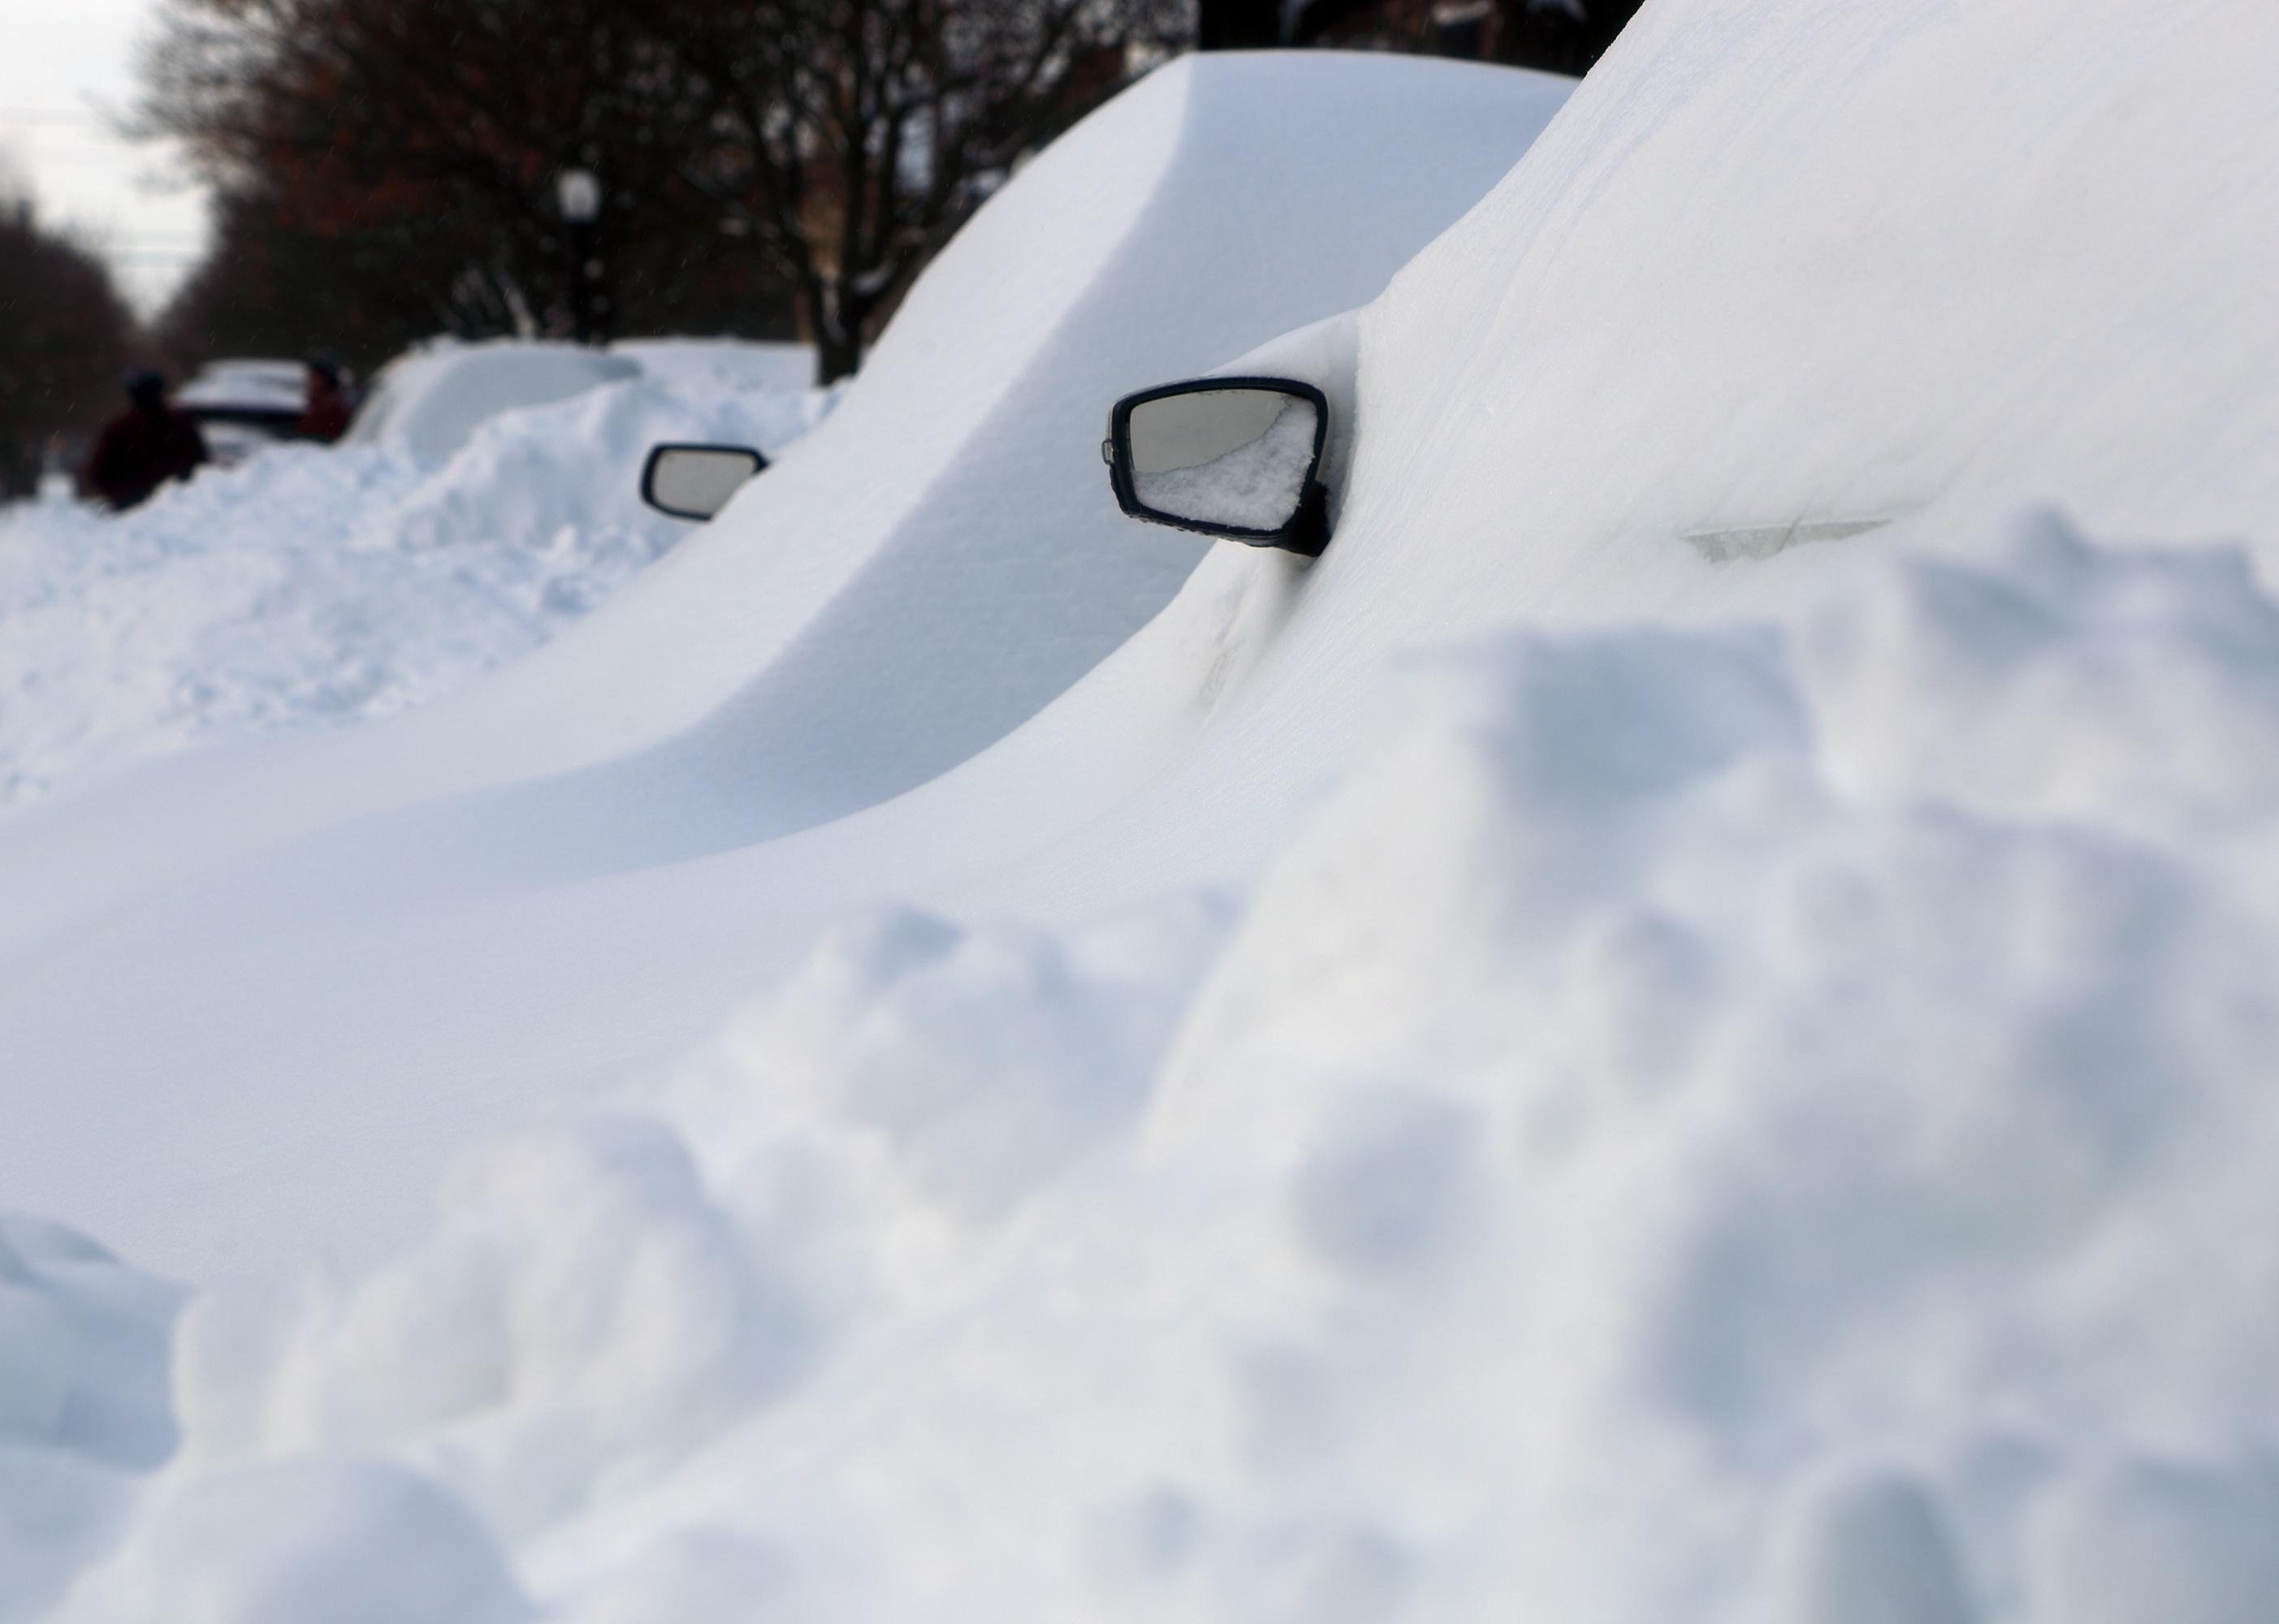 Vehicles covered with snow after a winter blizzard.